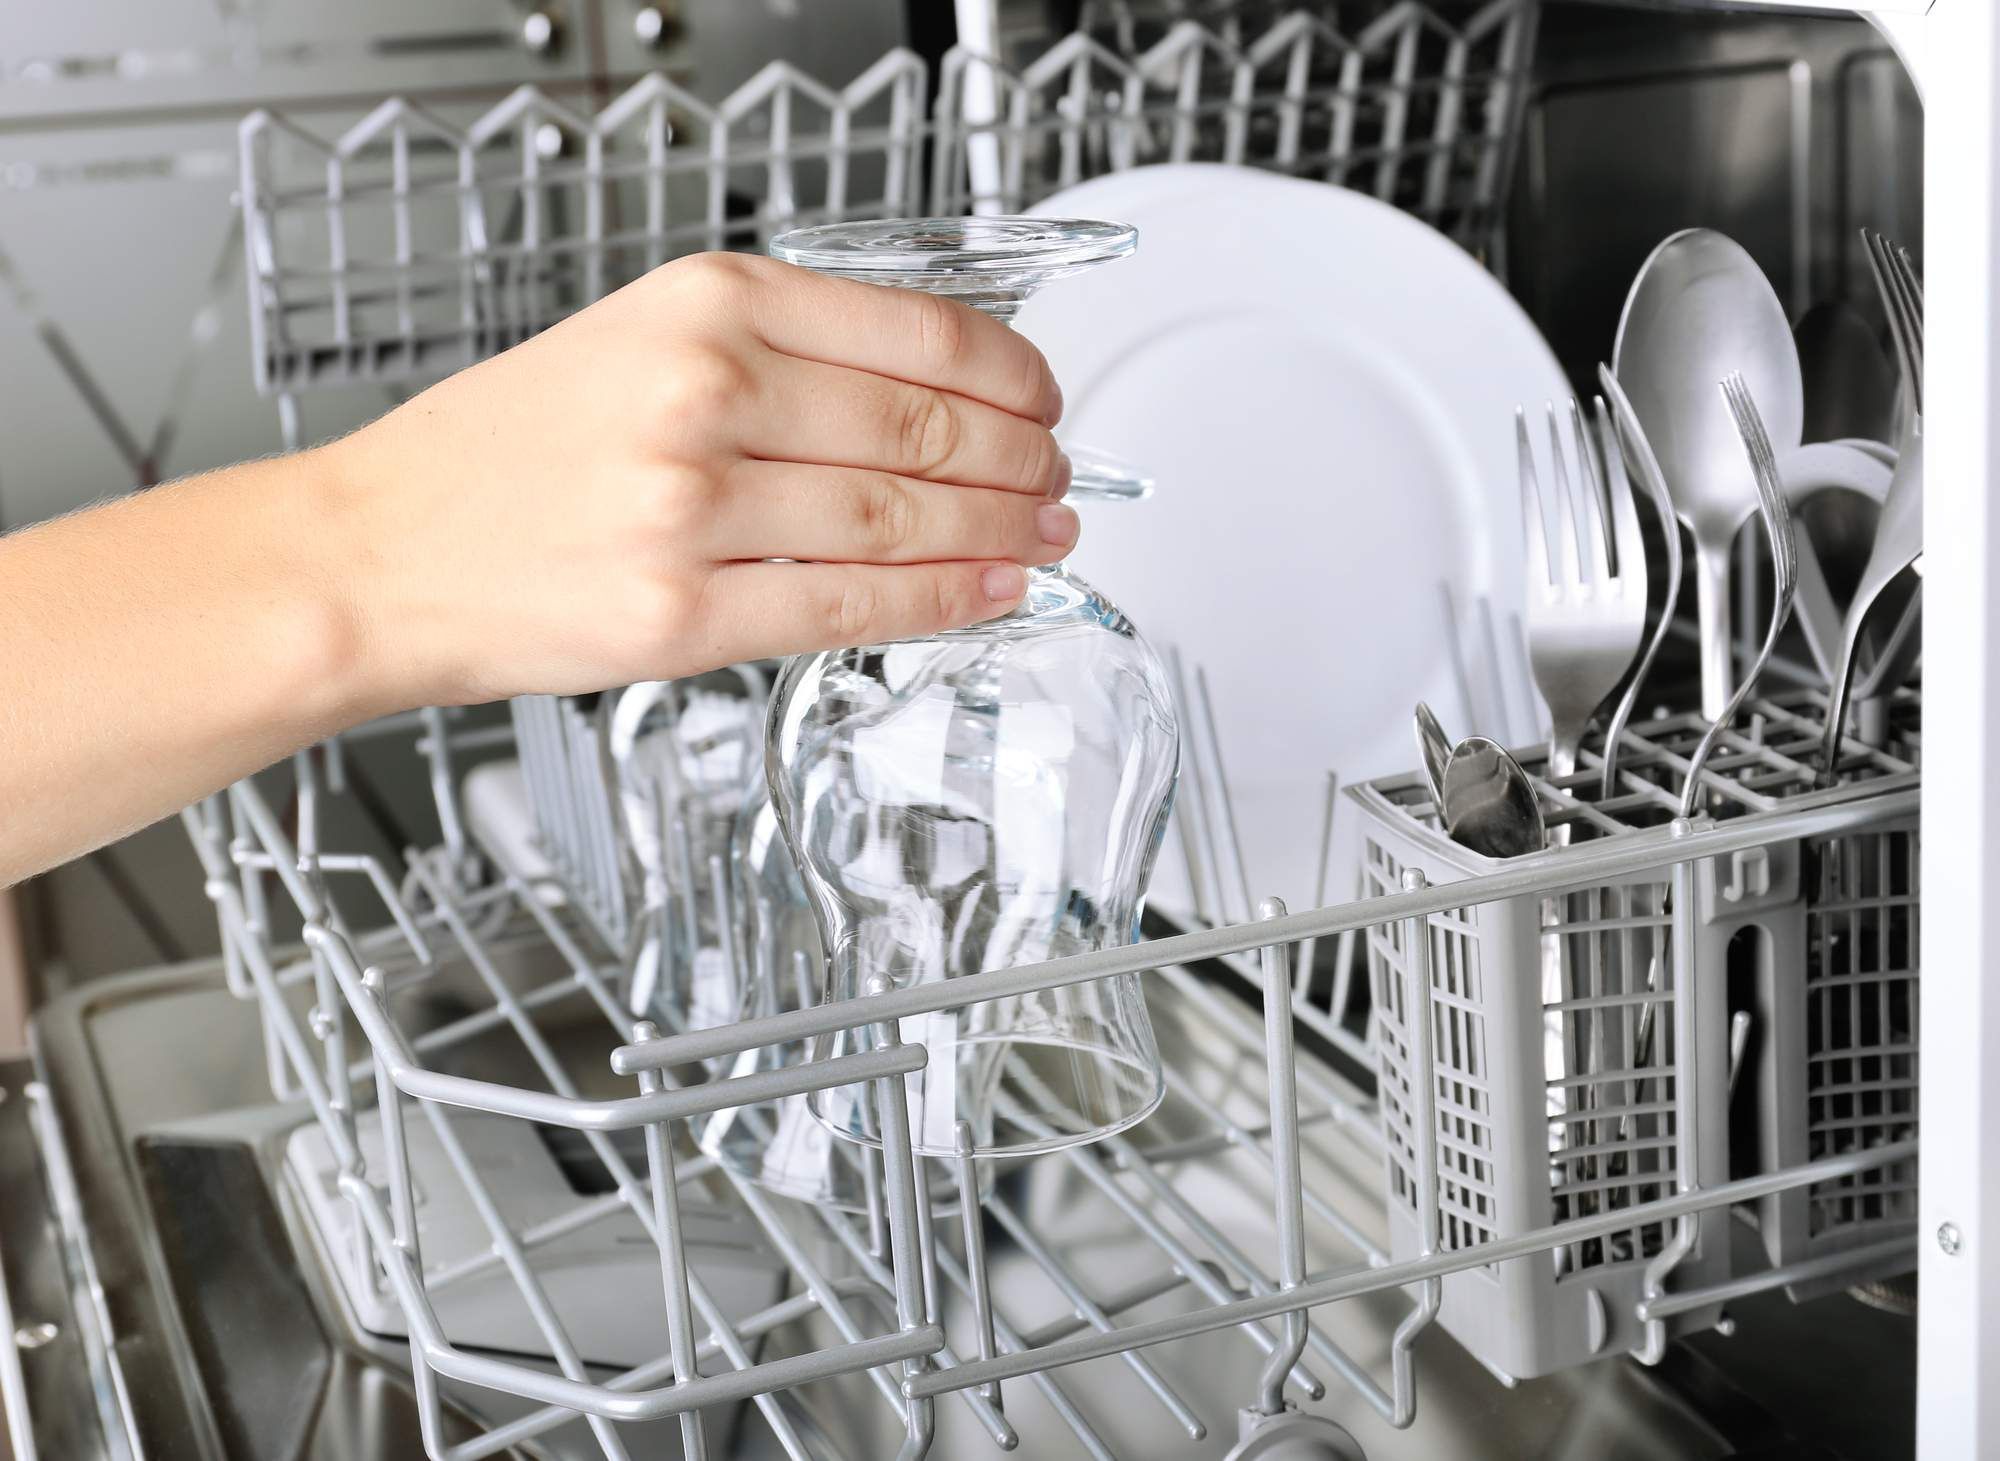 Whirlpool is facing a class action lawsuit over alleged defective dishwashers.